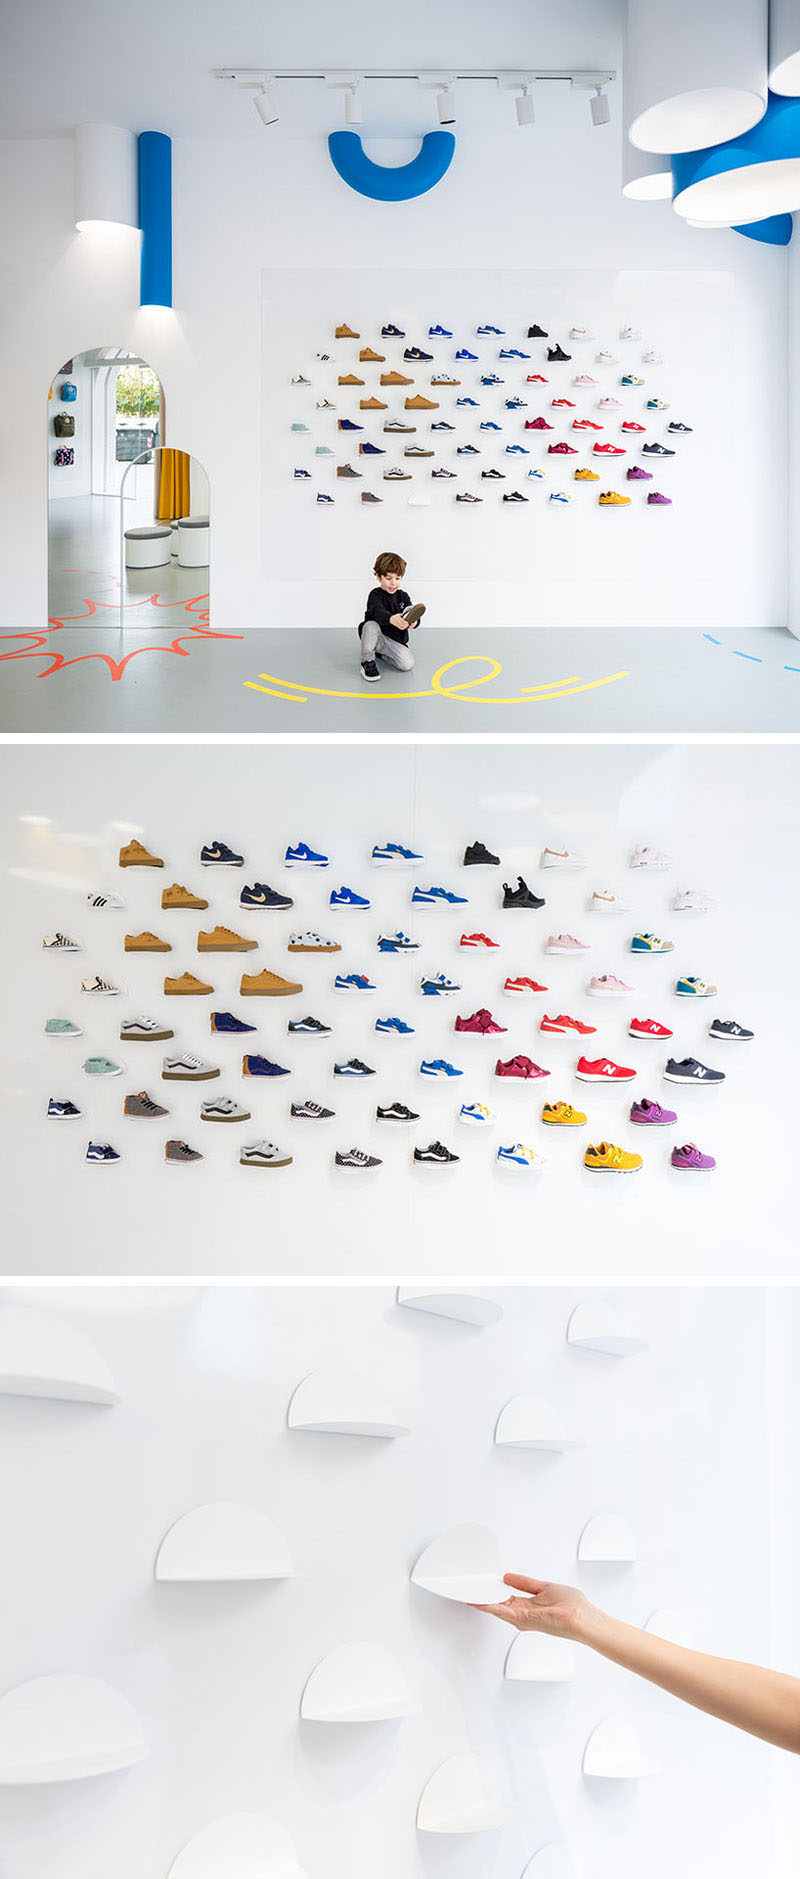 In this modern retail store, magnetic display plates on the walls and movable stands on the floor allow the design and layout to be changed when needed. #ShoeDisplay #ModernRetailStore